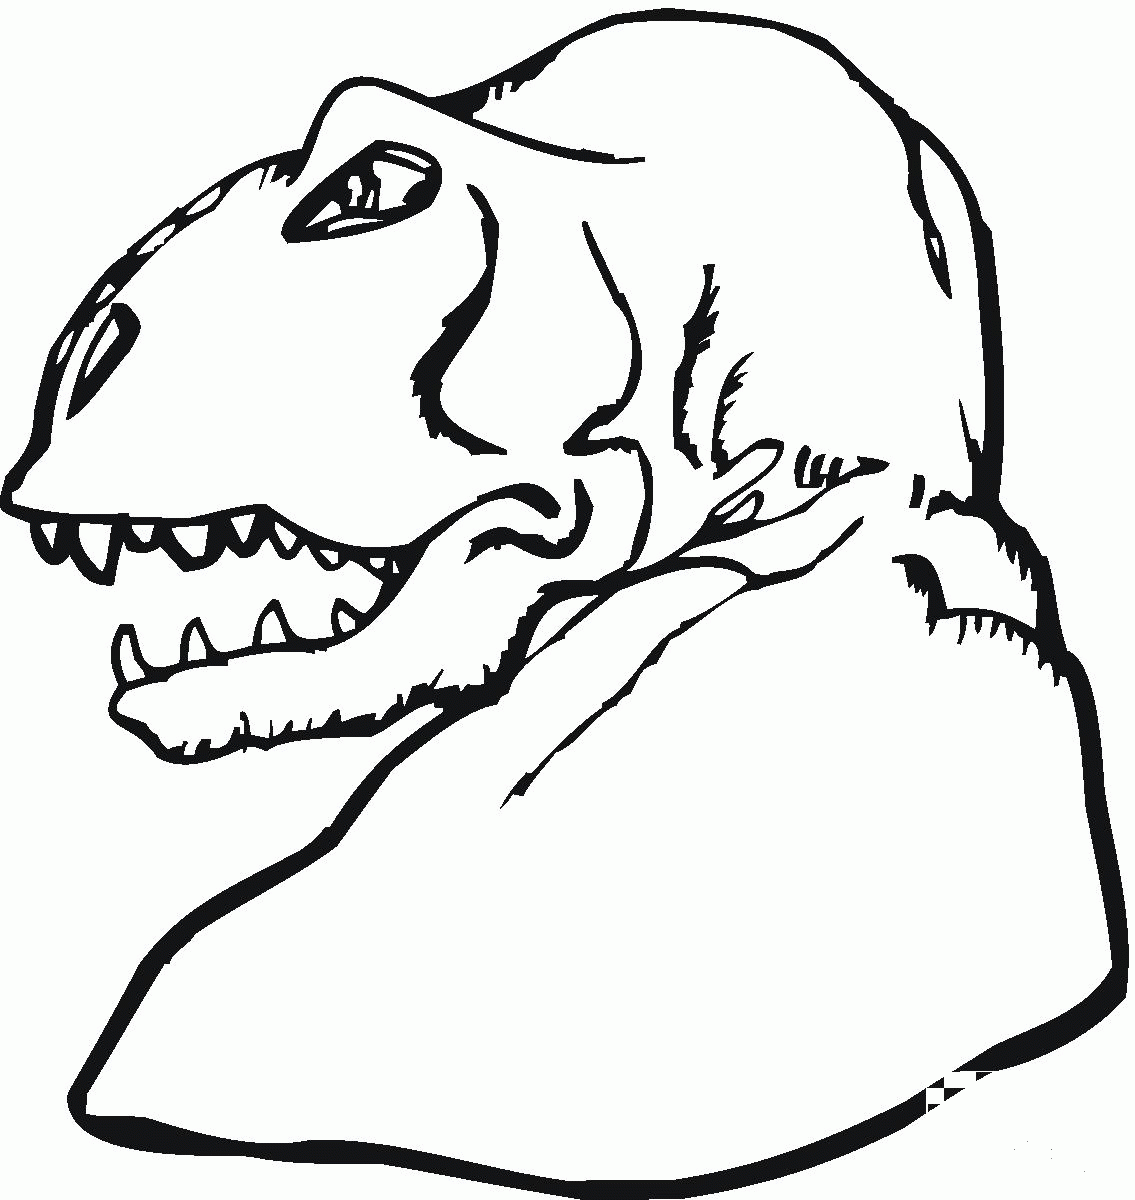 Tyrannosaurus Head coloring page - ColouringPages